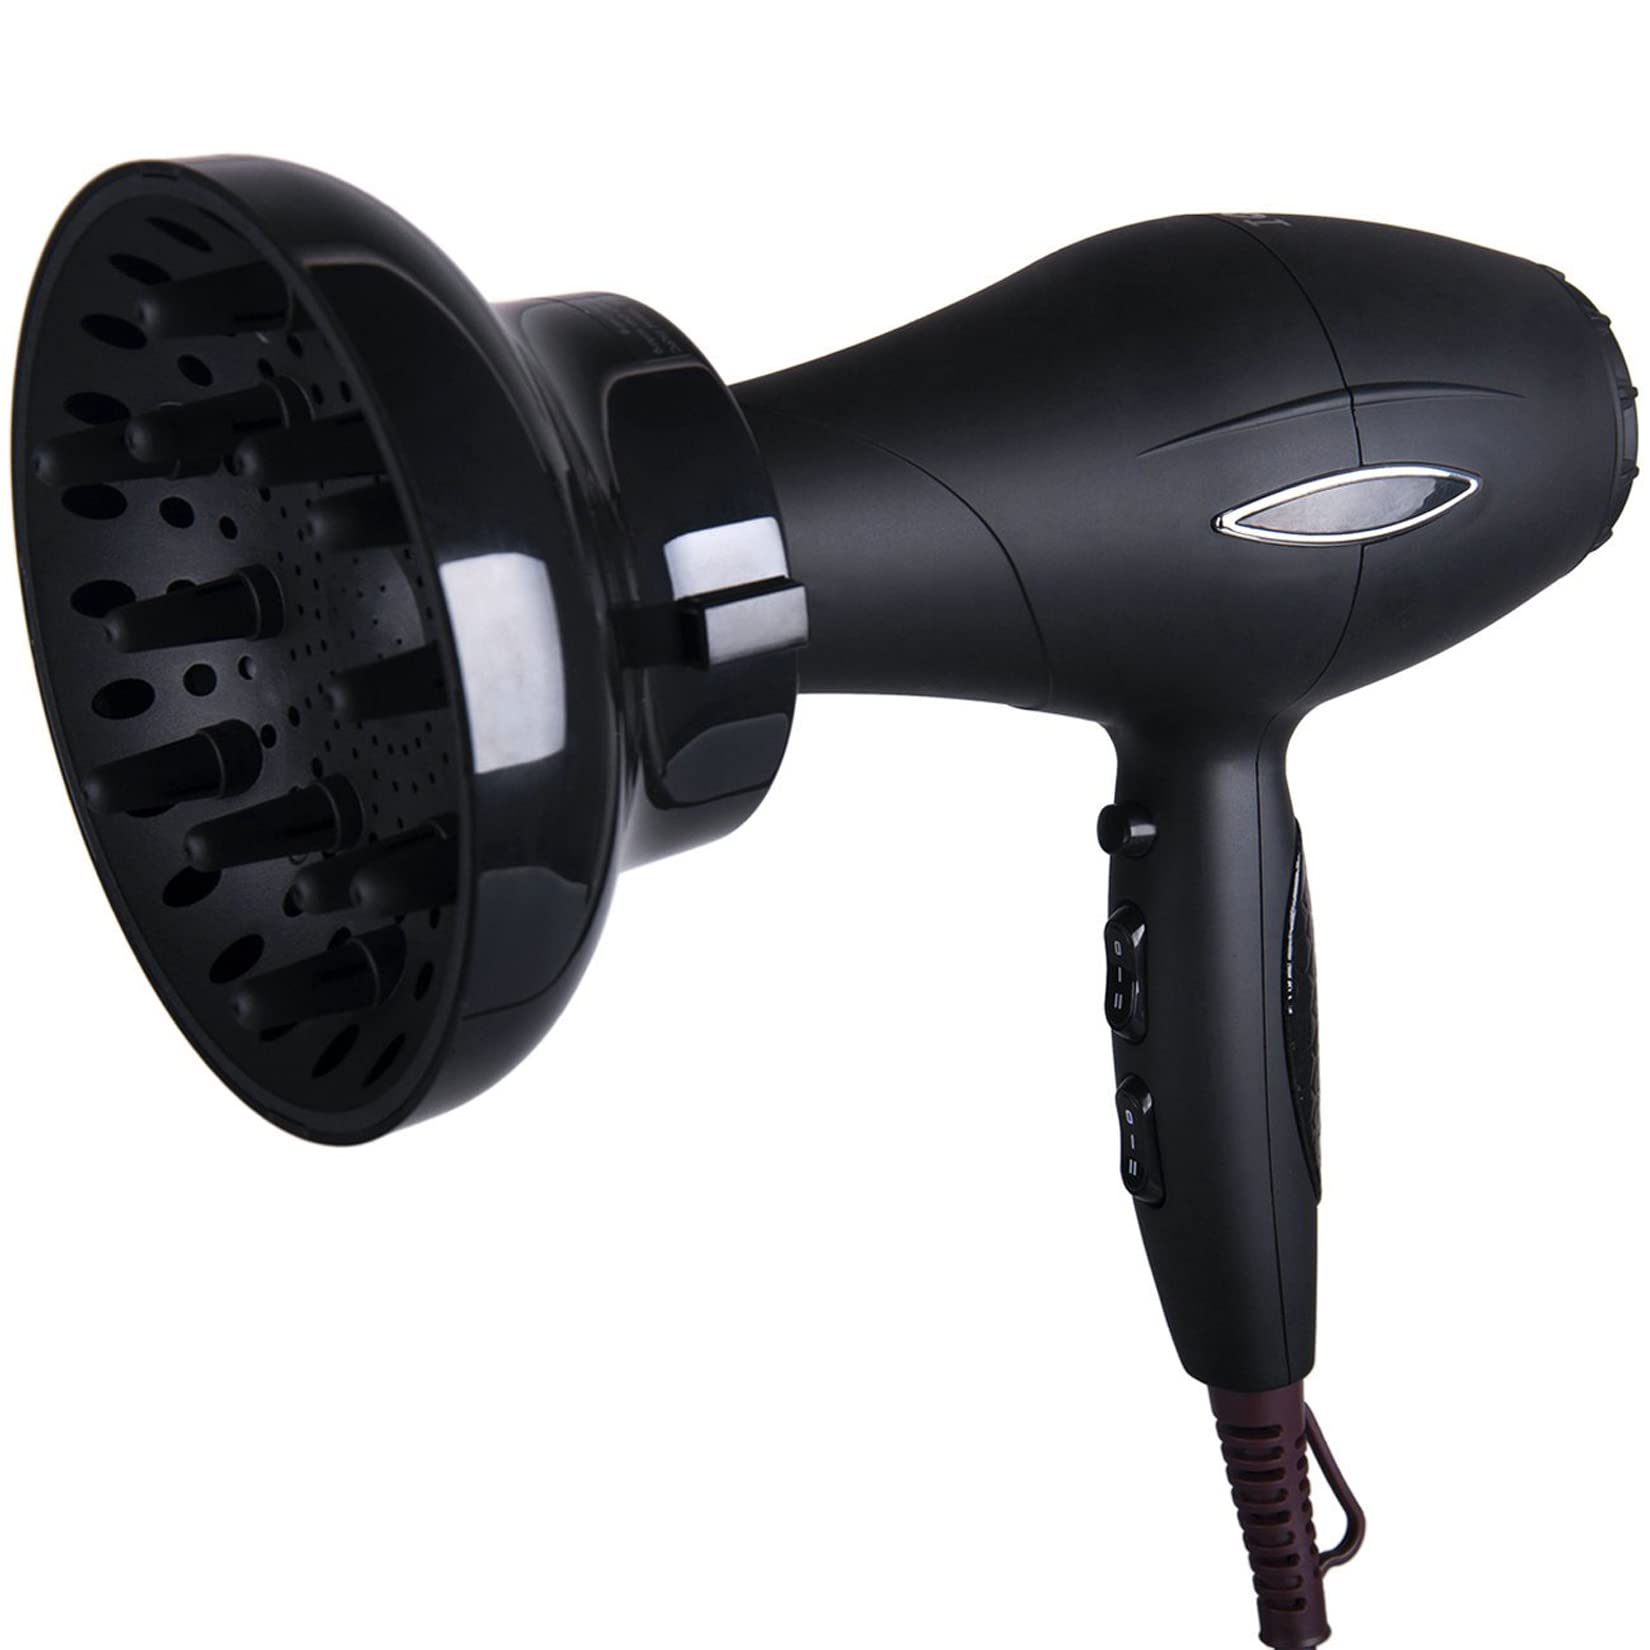 Hairizone Universal Hair Diffuser Adaptable for Blow Dryers with D-1.7-Inch to 2.6-Inch for Curly or Wavy Hair, Shiny Black